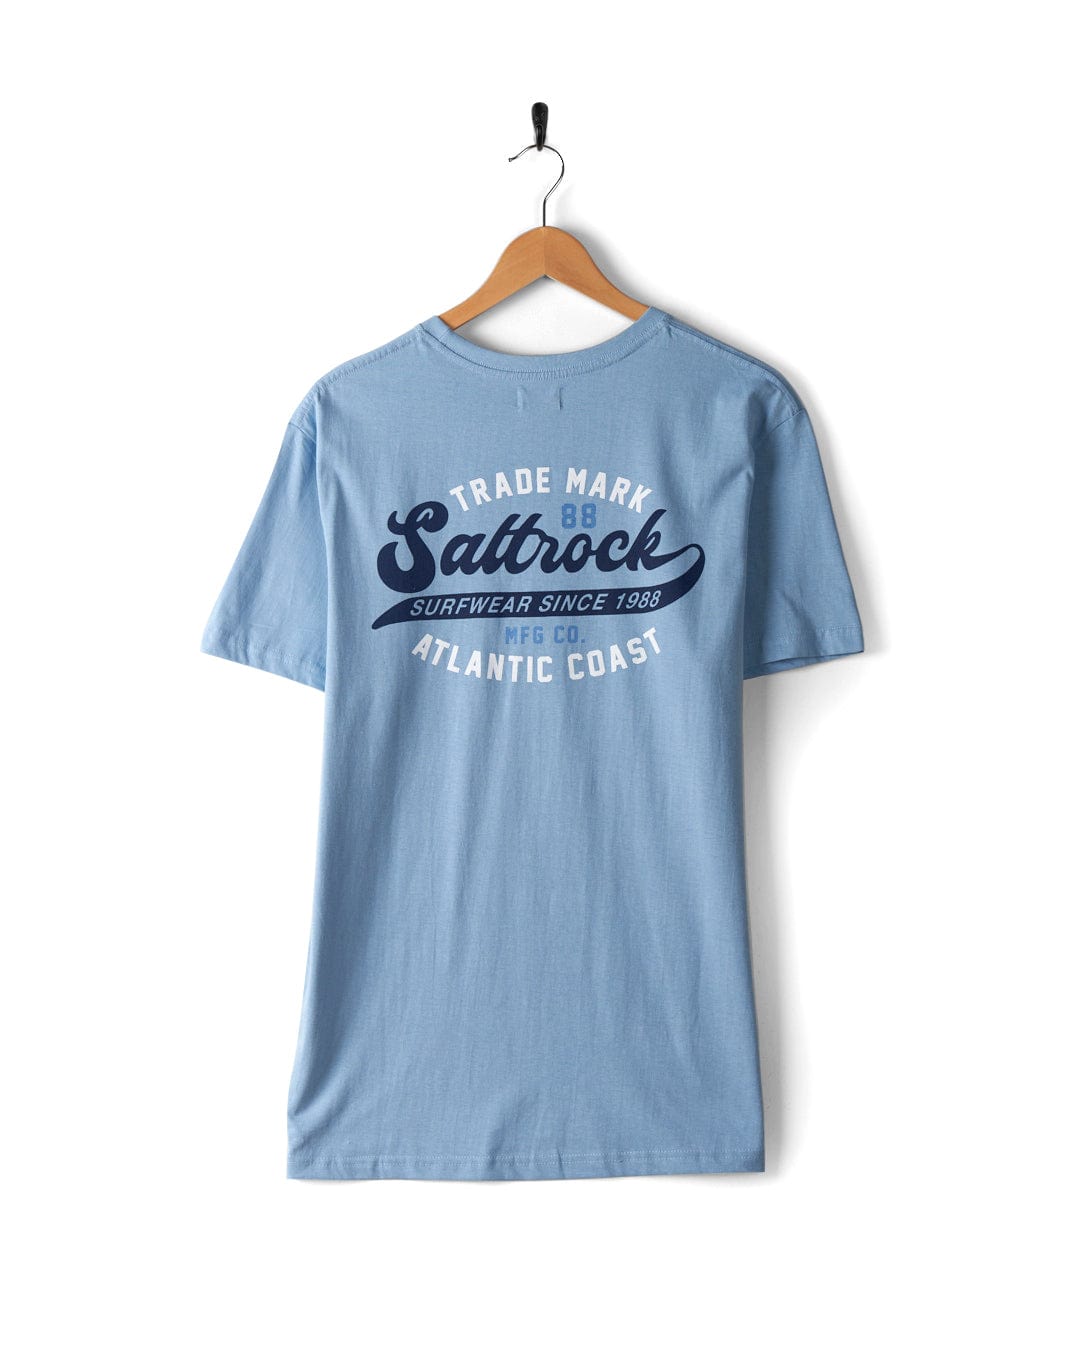 A light blue Home Run - Mens T-Shirt - Blue, made from 100% cotton, featuring a “Saltrock” logo and “Surewear Since 1968 MFG Co. Atlantic Coast” text printed on the back, hangs gracefully on a wooden hanger.